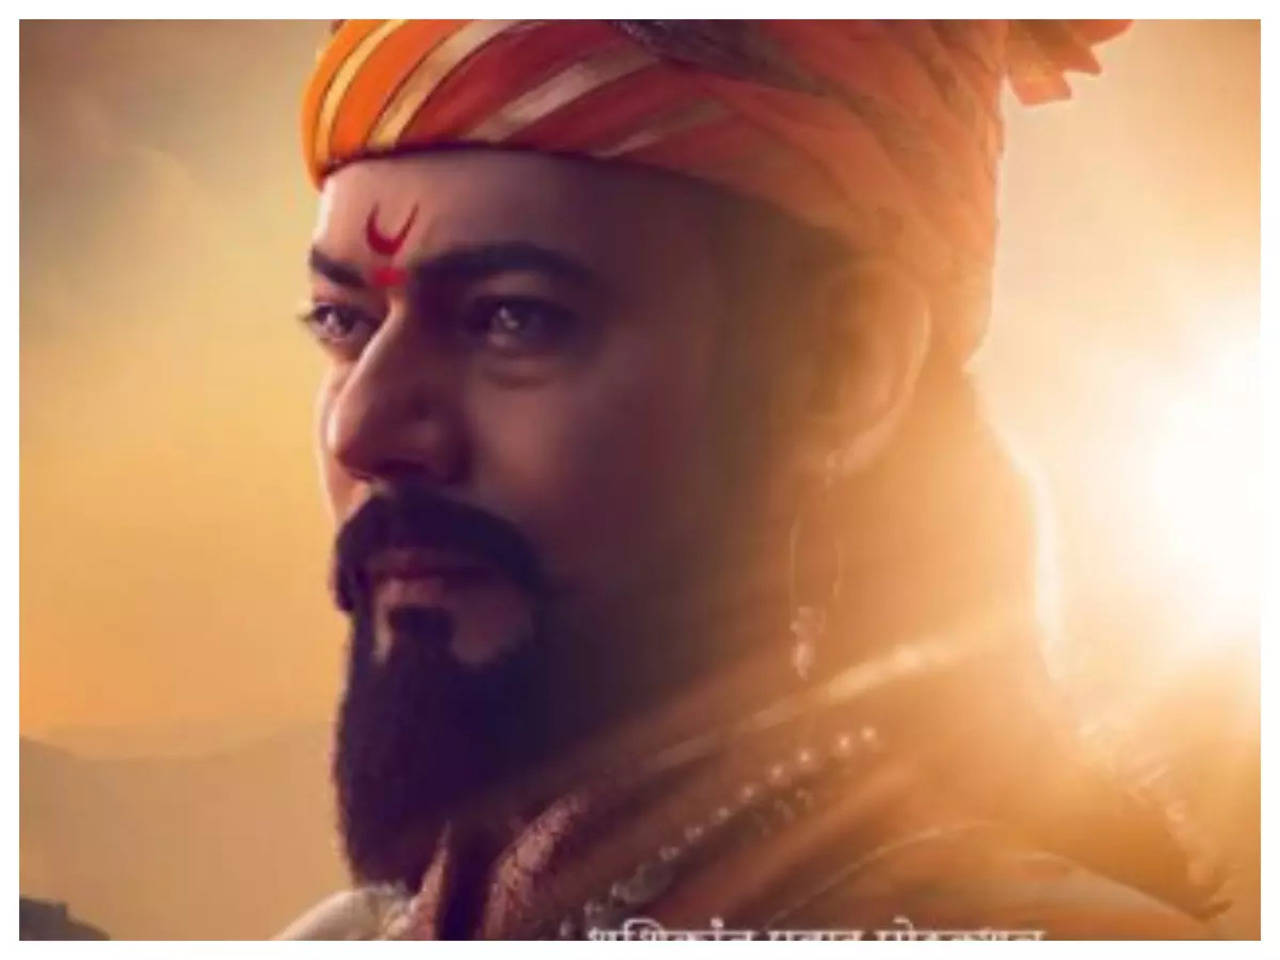 CNBC-TV18 - On his birth anniversary, here is a timeline of the great  Maratha King, Chhatrapati Shivaji Maharaj #ShivajiMaharaj  #ChhatrapatiShivajiMaharaj | Facebook